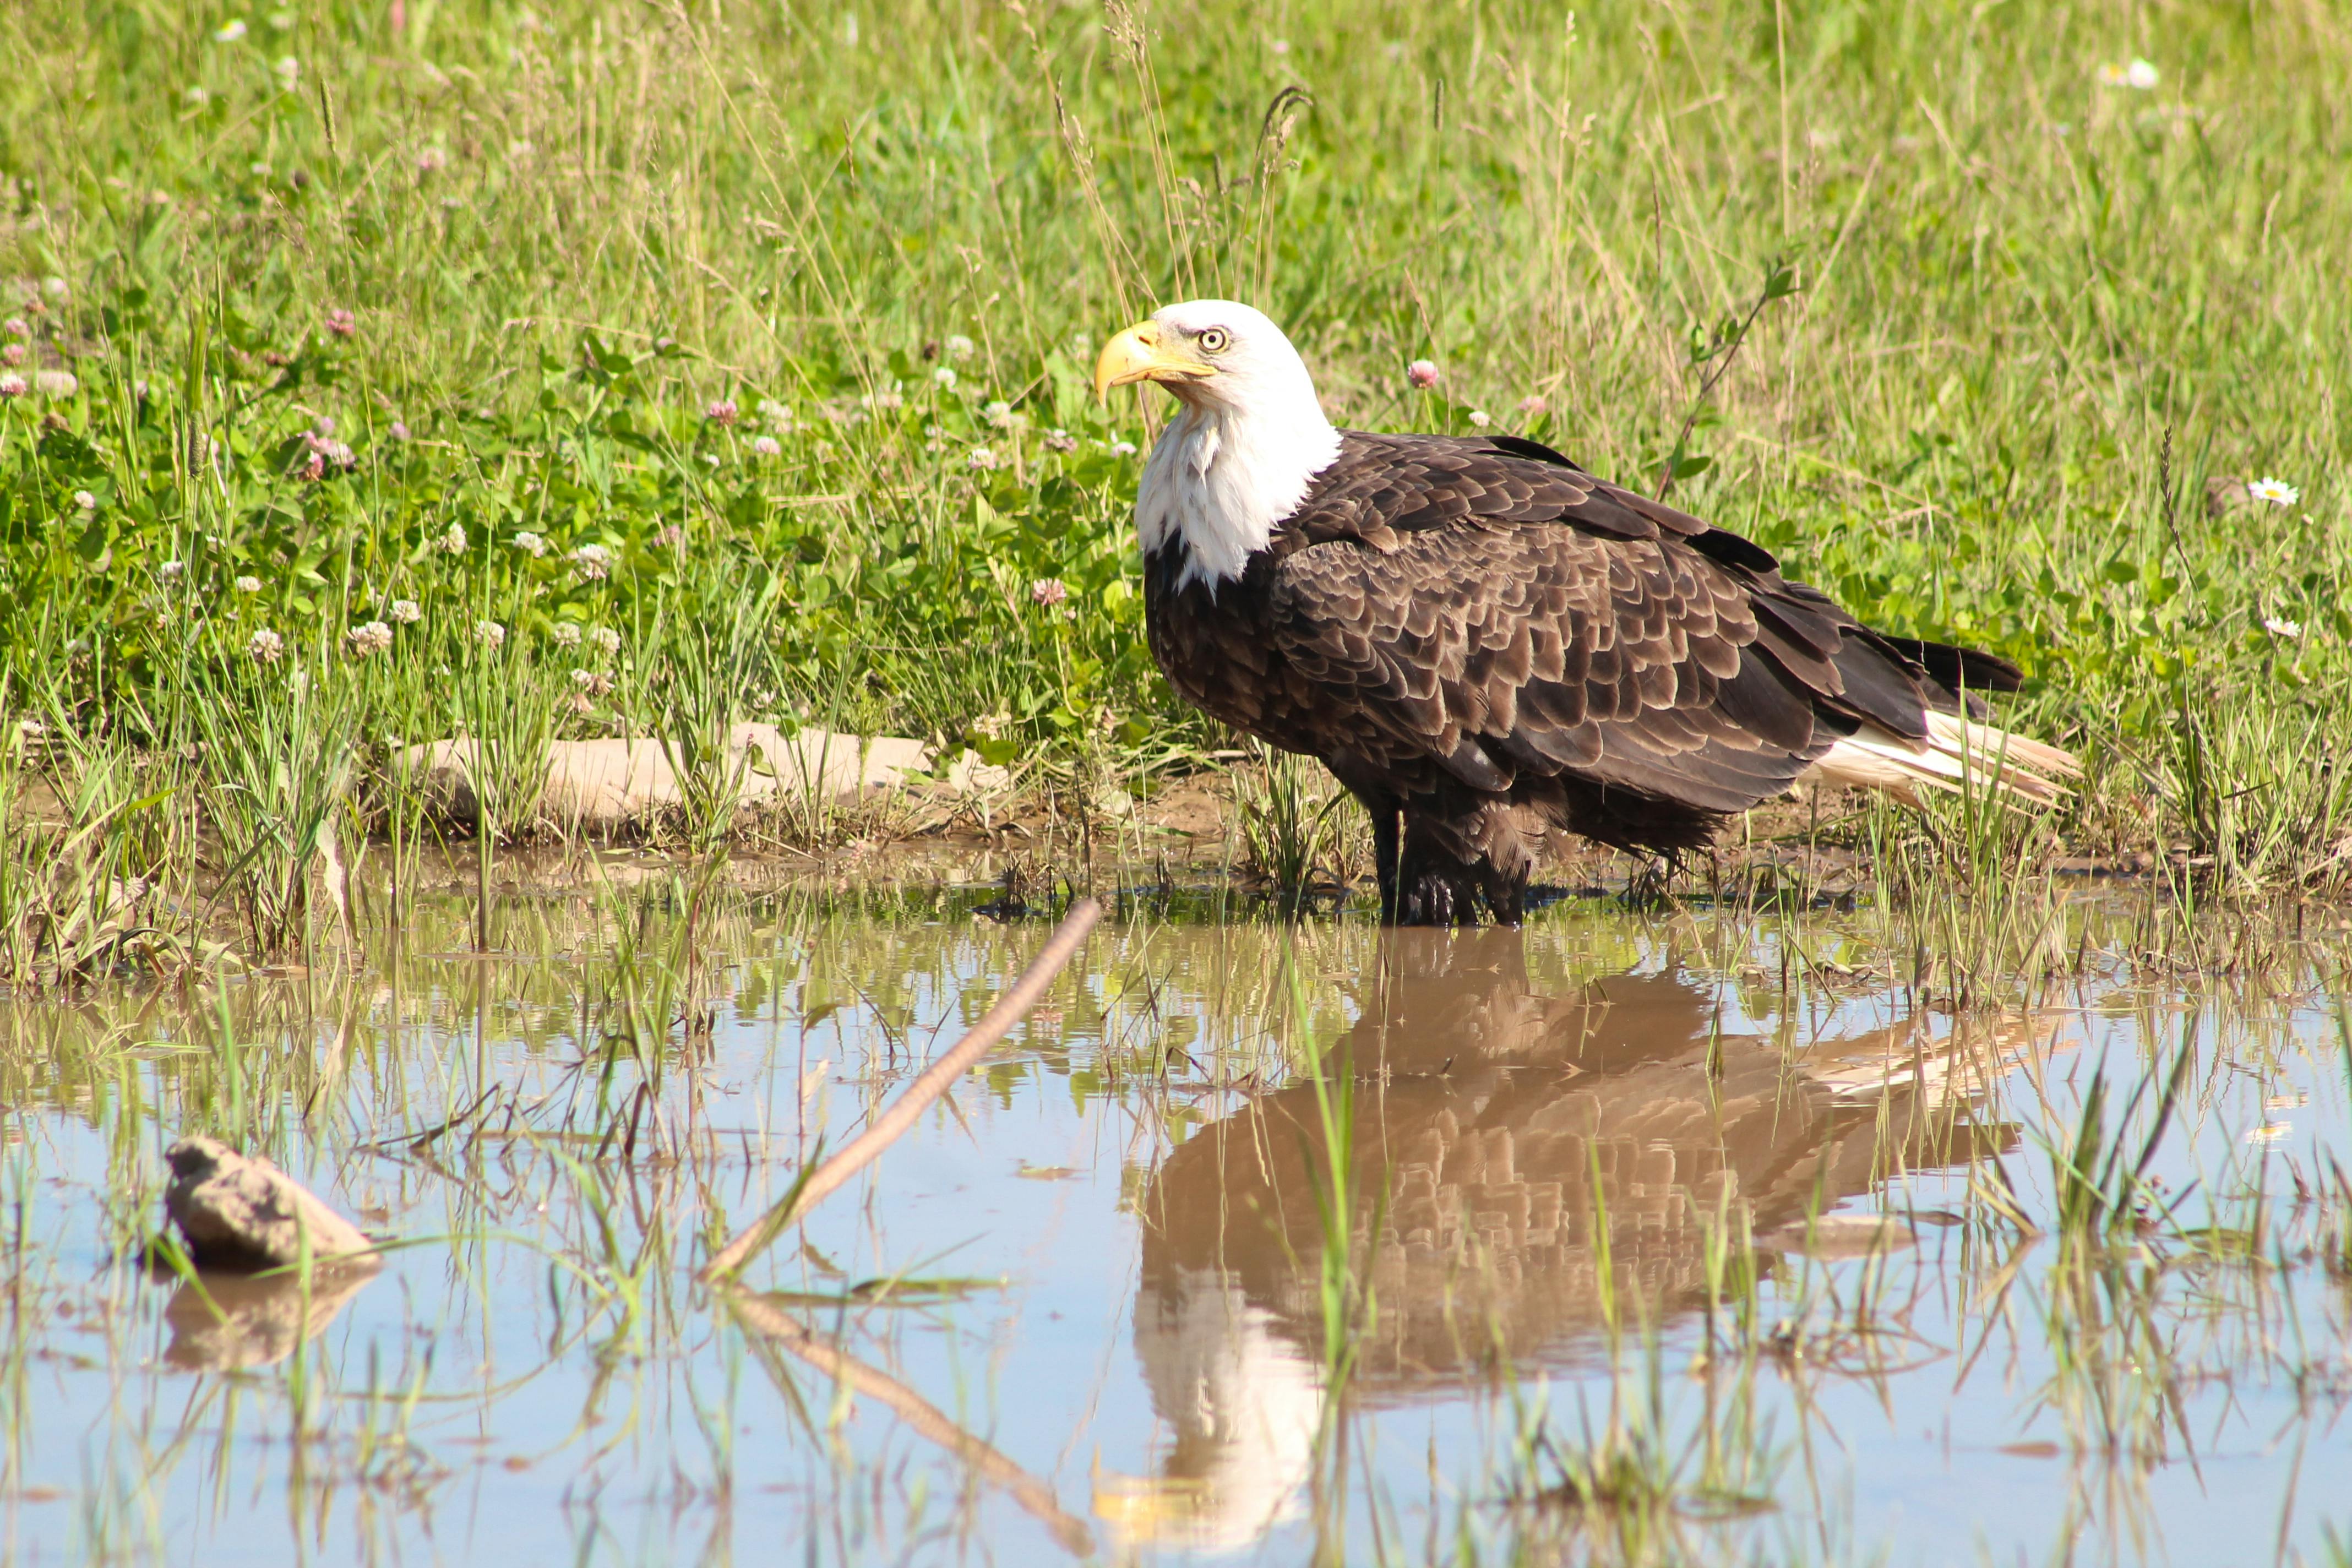 Ruth Boudreau came across this magnificent bird of prey on Cheticamp Island earlier this month.  It had been very warm and Ruth says “even the eagles needed to cool down on this hot Sunday afternoon”.   That photo is stunning.  Thank you for sharing Ruth!